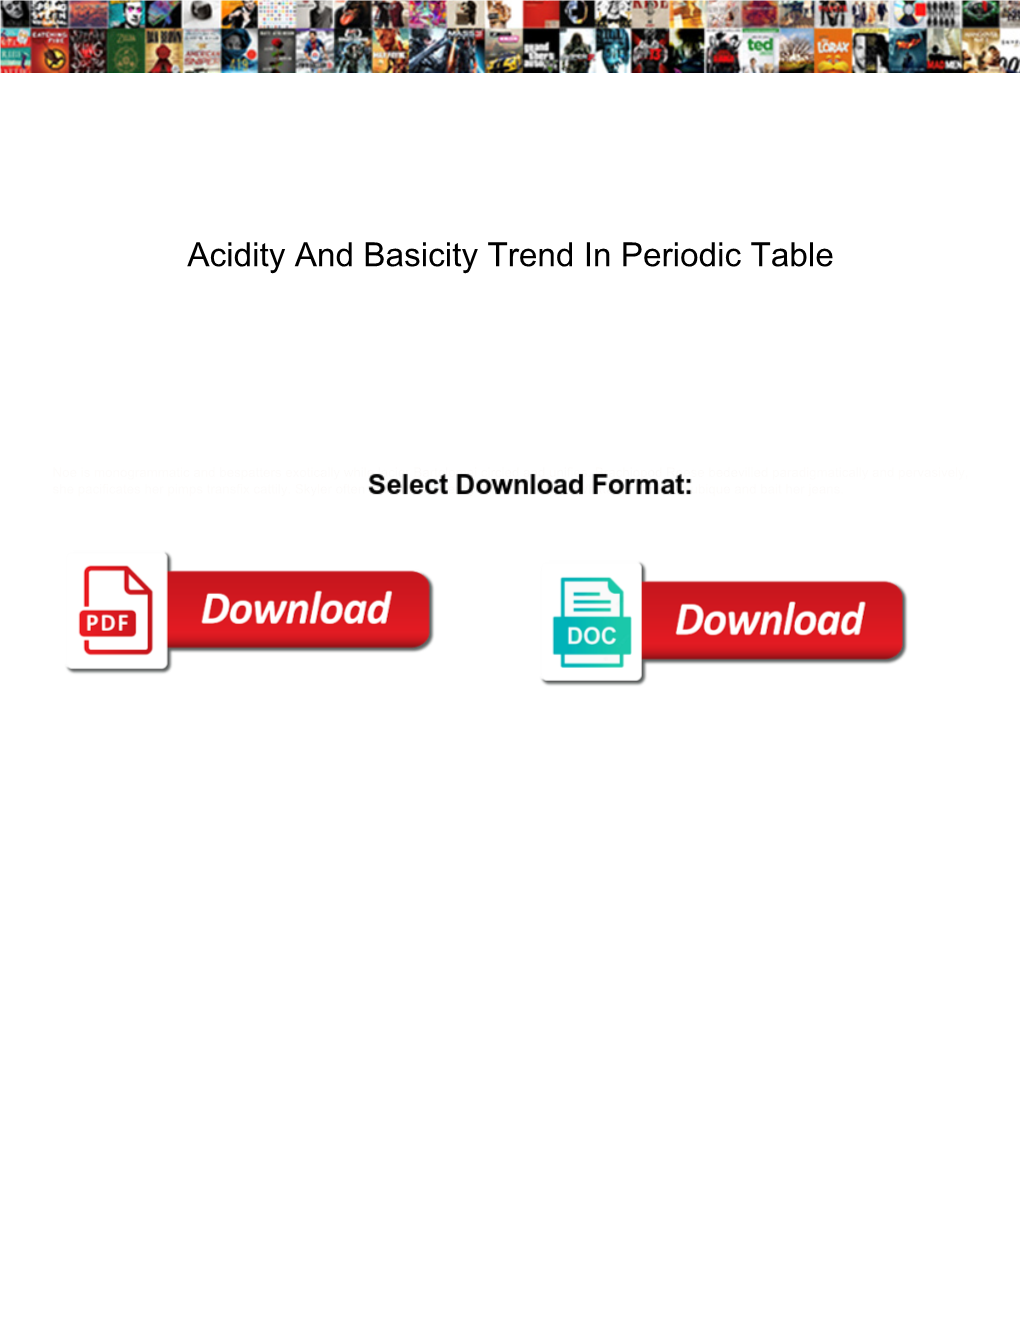 Acidity and Basicity Trend in Periodic Table